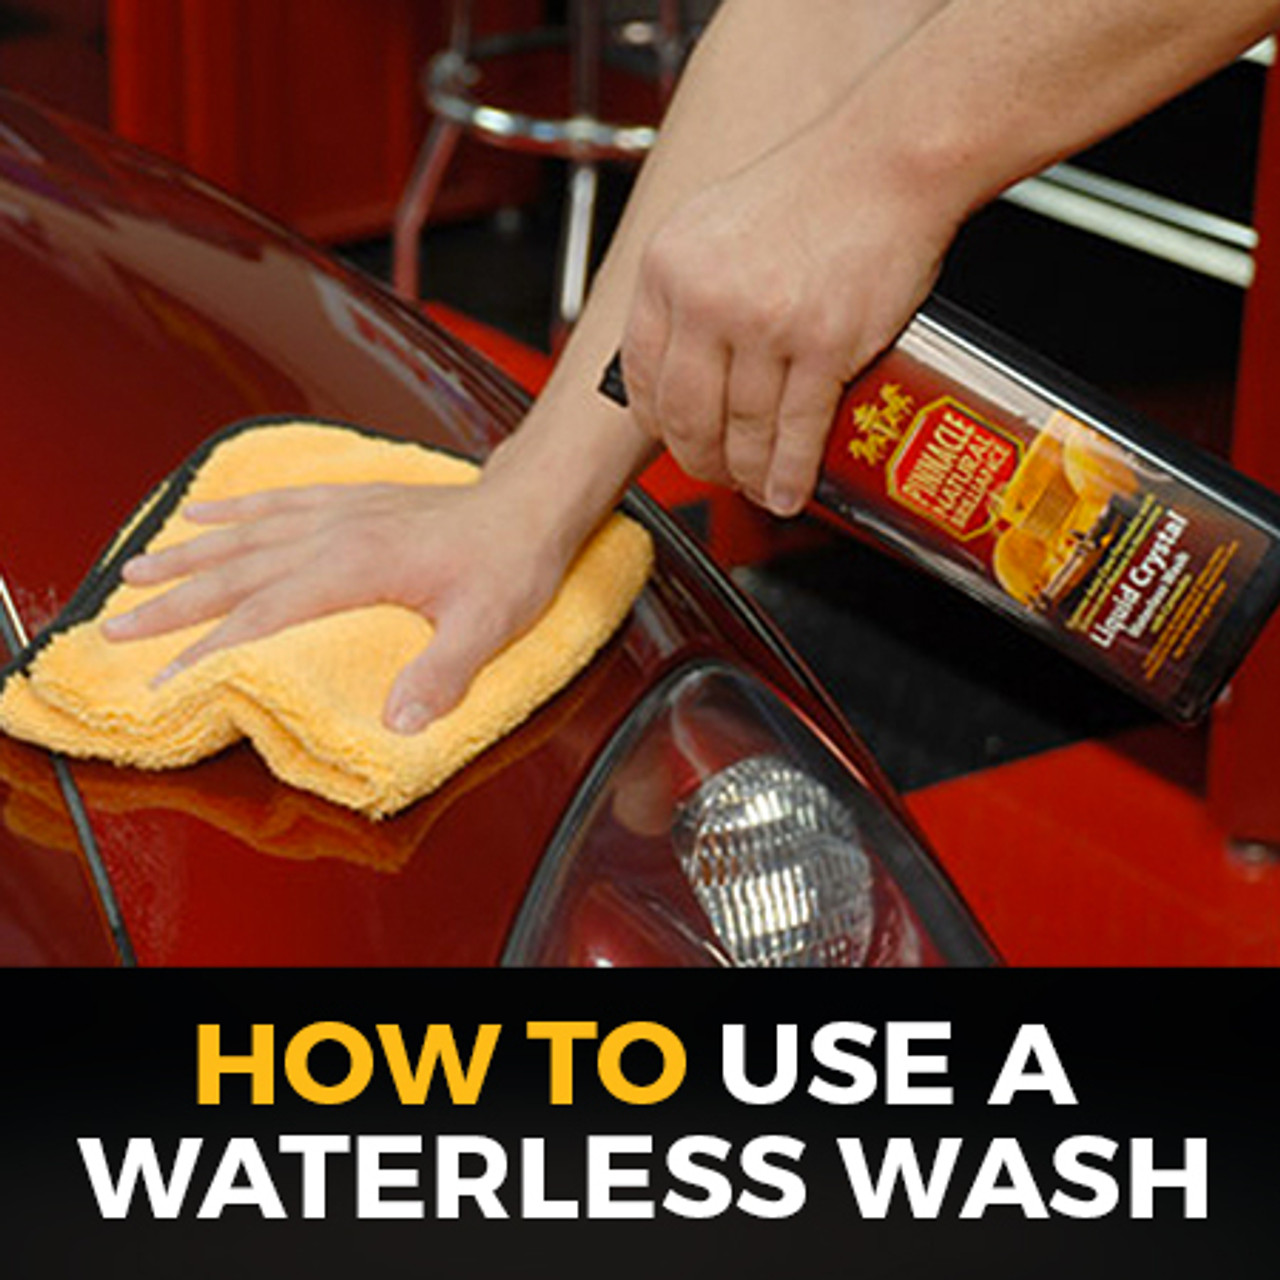 How To Use A Waterless Wash